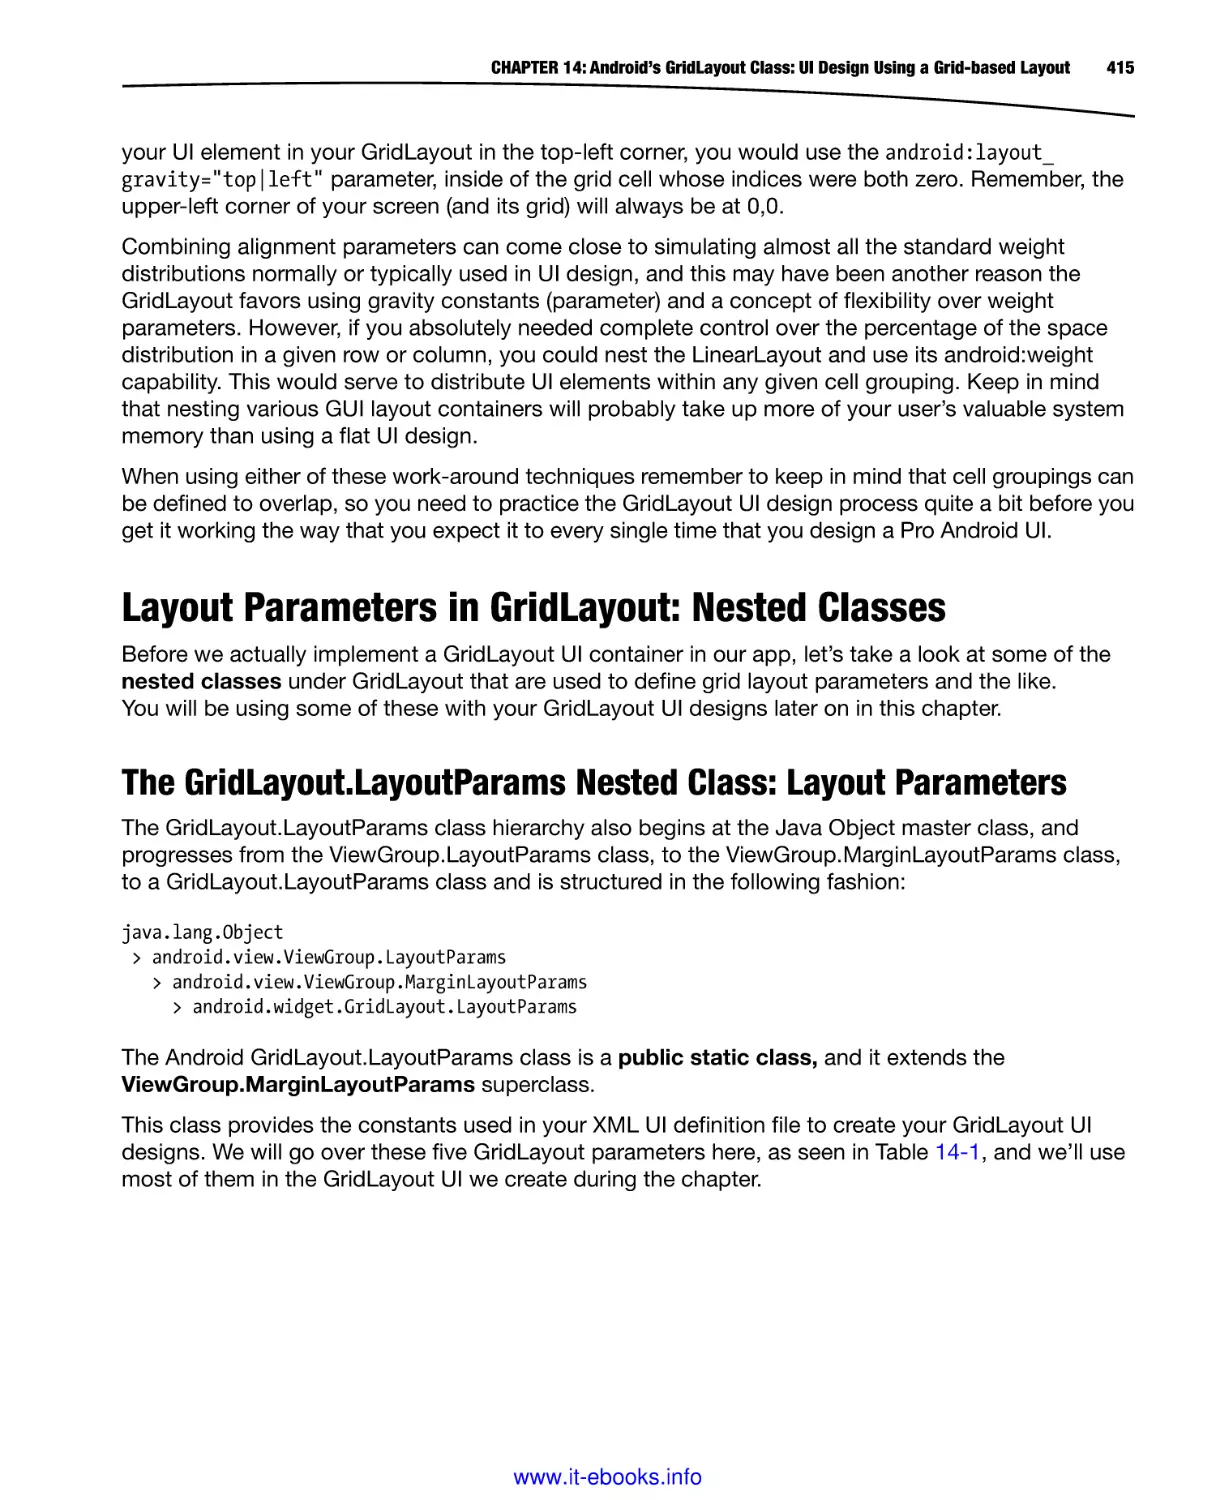 Layout Parameters in GridLayout
The GridLayout.LayoutParams Nested Class